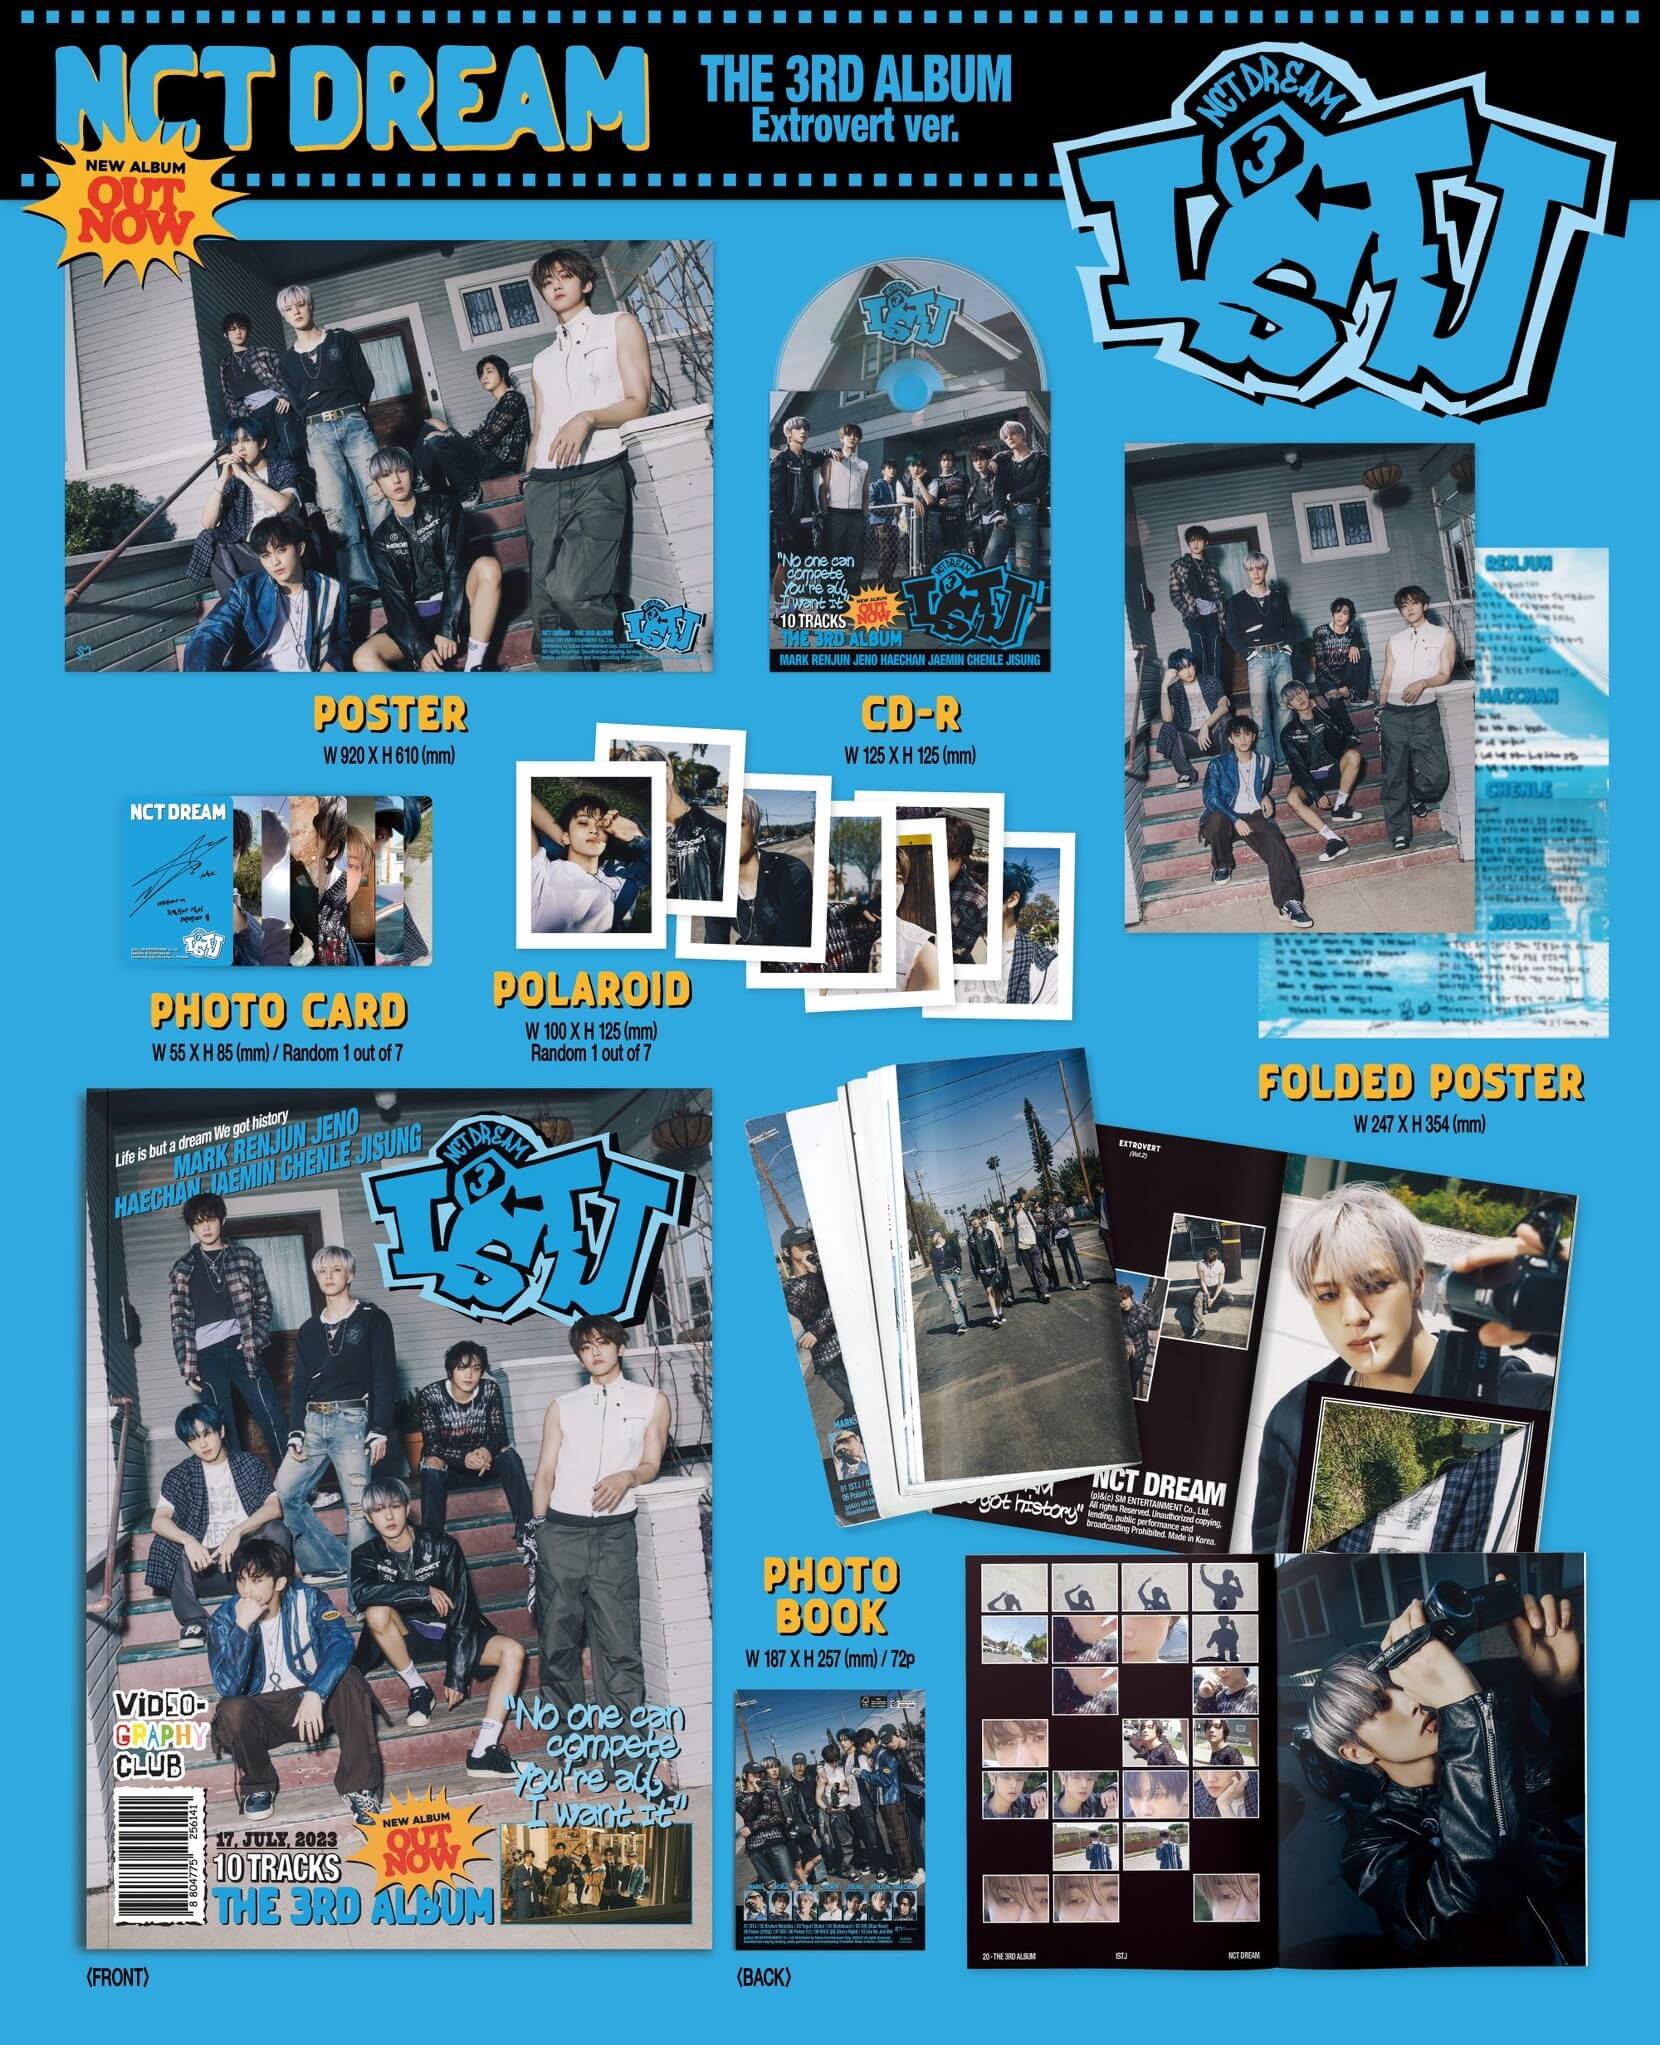 NCT DREAM ISTJ (Photobook Ver.) - Extrovert Version Inclusions Photobook CD Folded Poster Photocard Polaroid 1st Press Only Poster